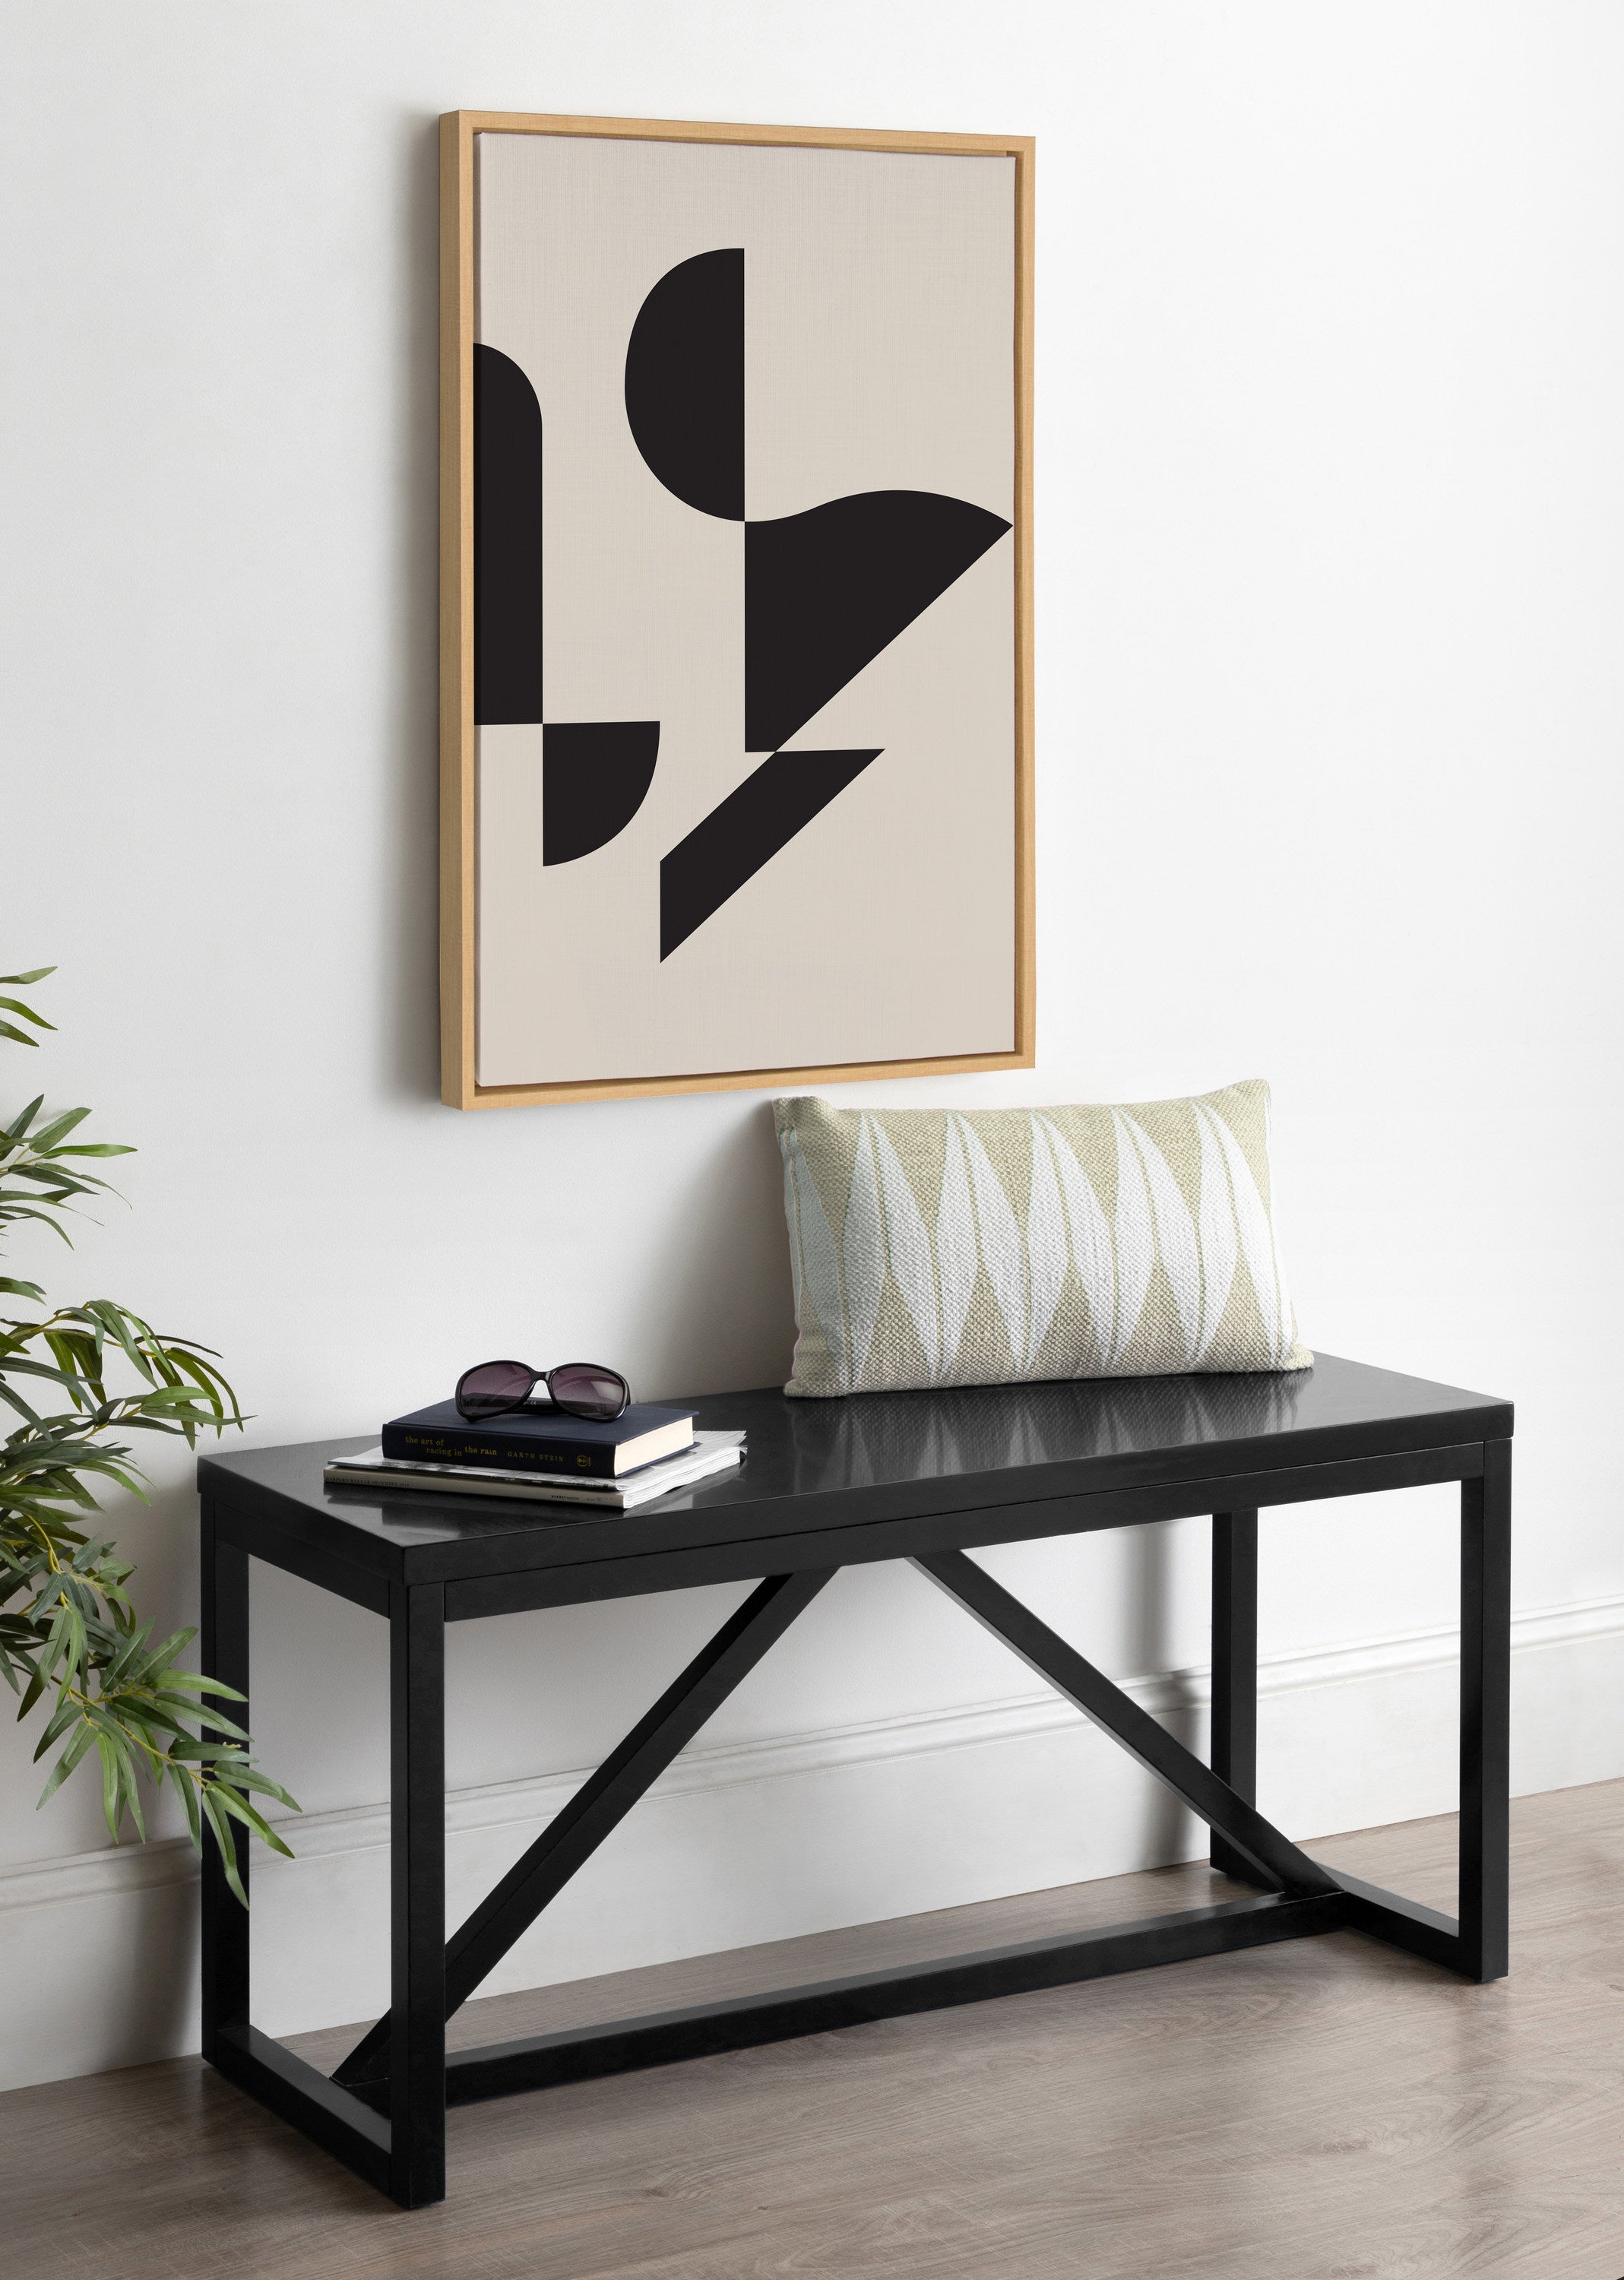 Sylvie Eye Catching Sleek Abstract 1 Black and Beige Framed Canvas by The Creative Bunch Studio